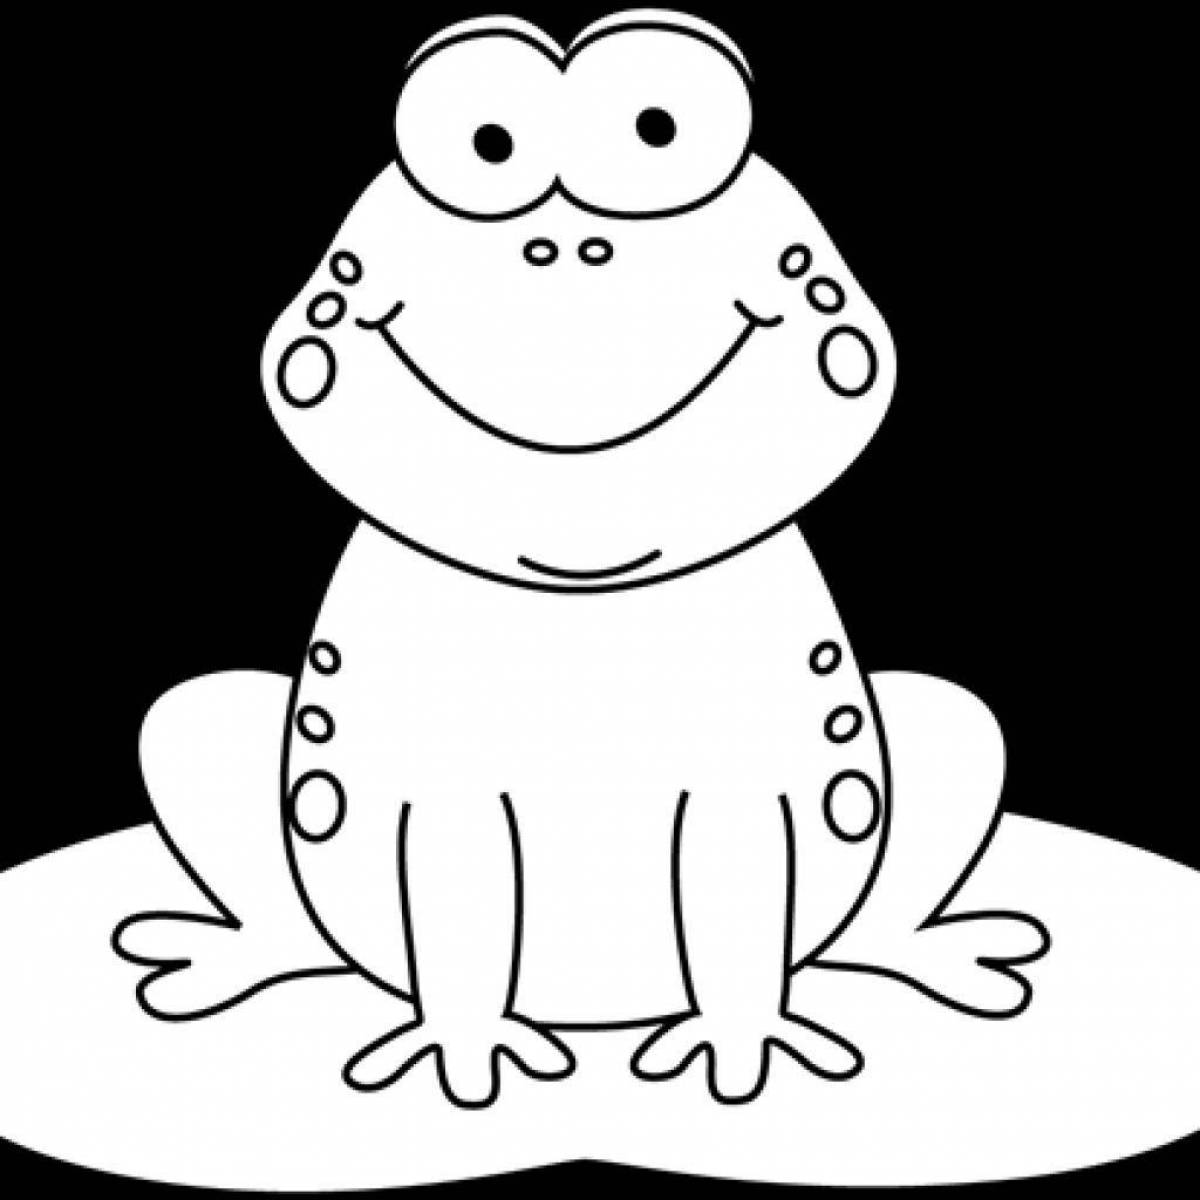 Outstanding toad coloring page for kids